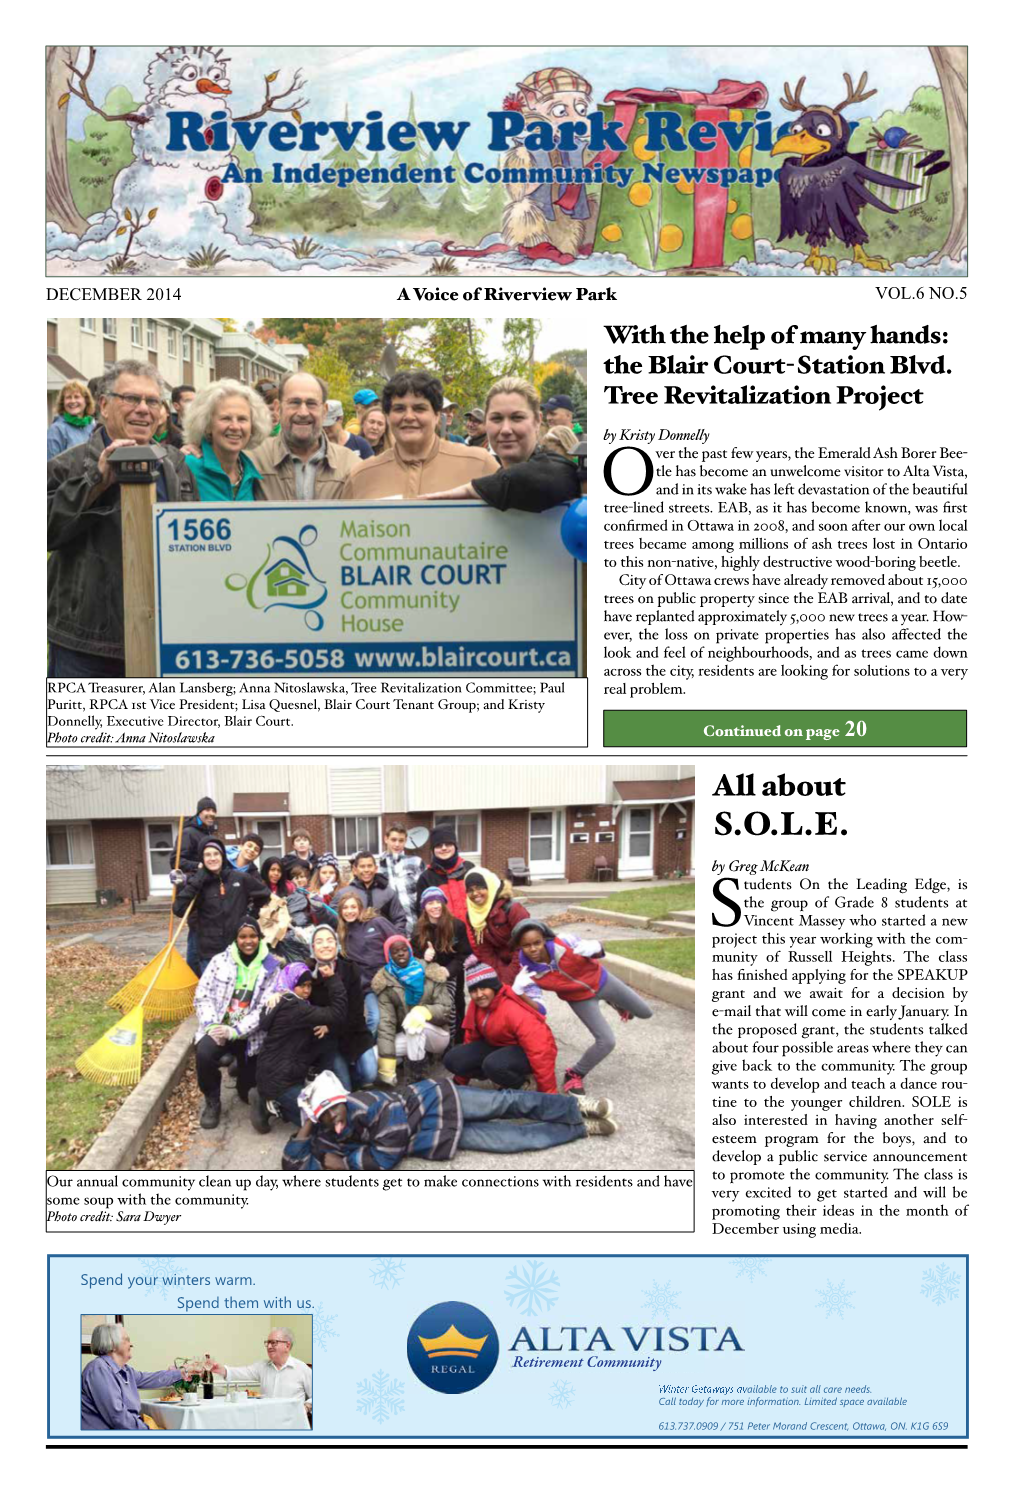 DECEMBER 2014 a Voice of Riverview Park VOL.6 NO.5 with the Help of Many Hands: the Blair Court-Station Blvd